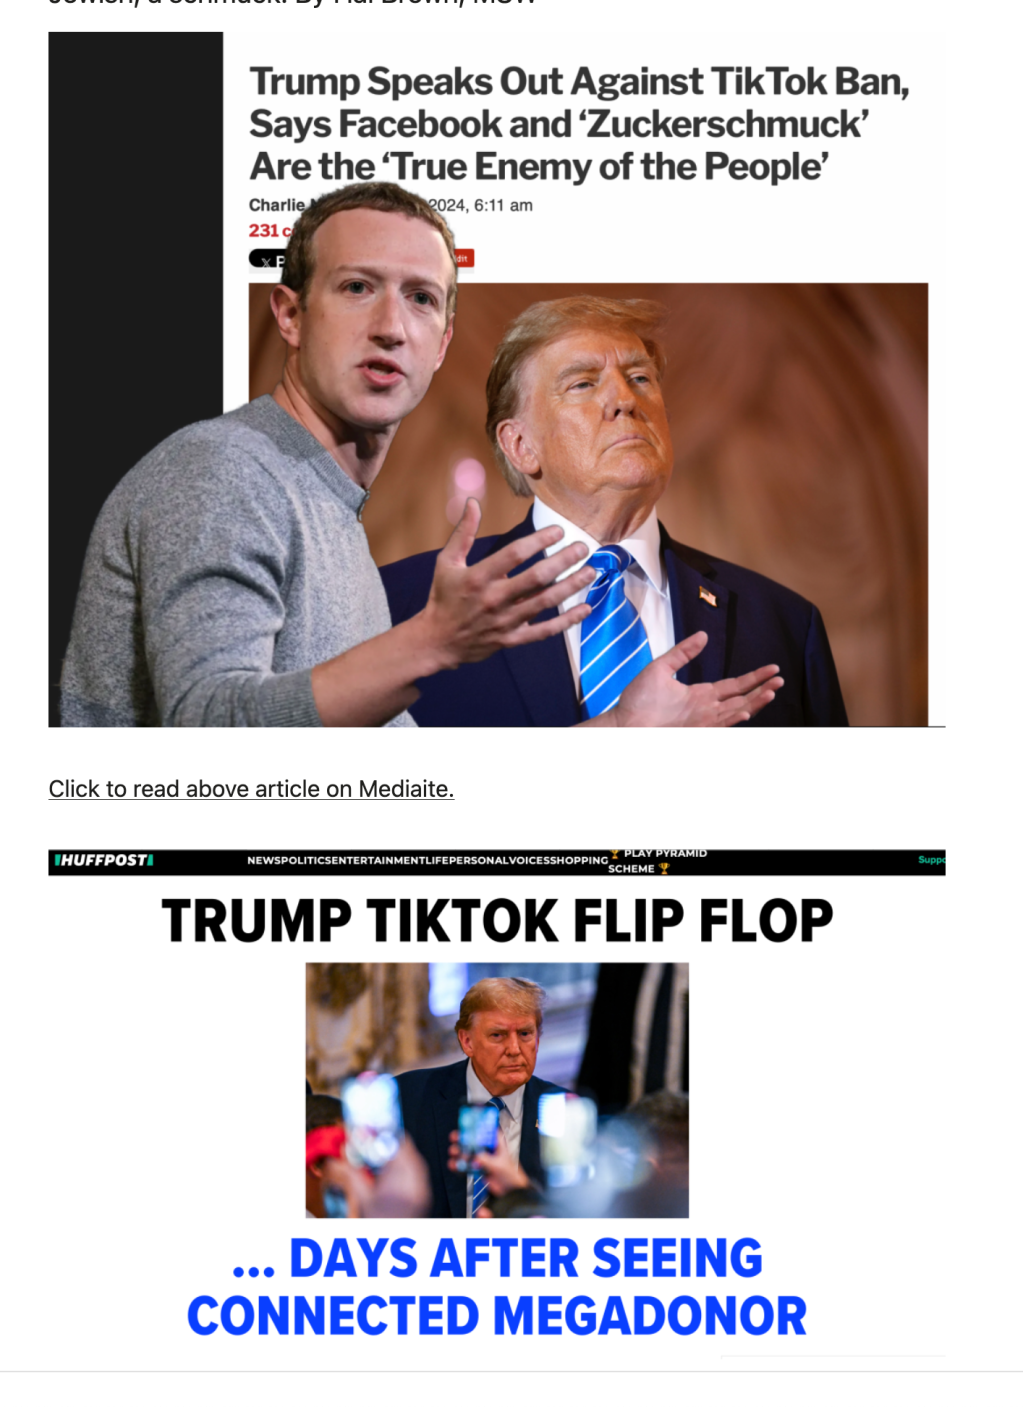 Just a bit of antisemitism from Trump: he calls Mark Zuckerberg, who is Jewish, a schmuck, and a “true enemy of the people.” By Hal Brown, MSW